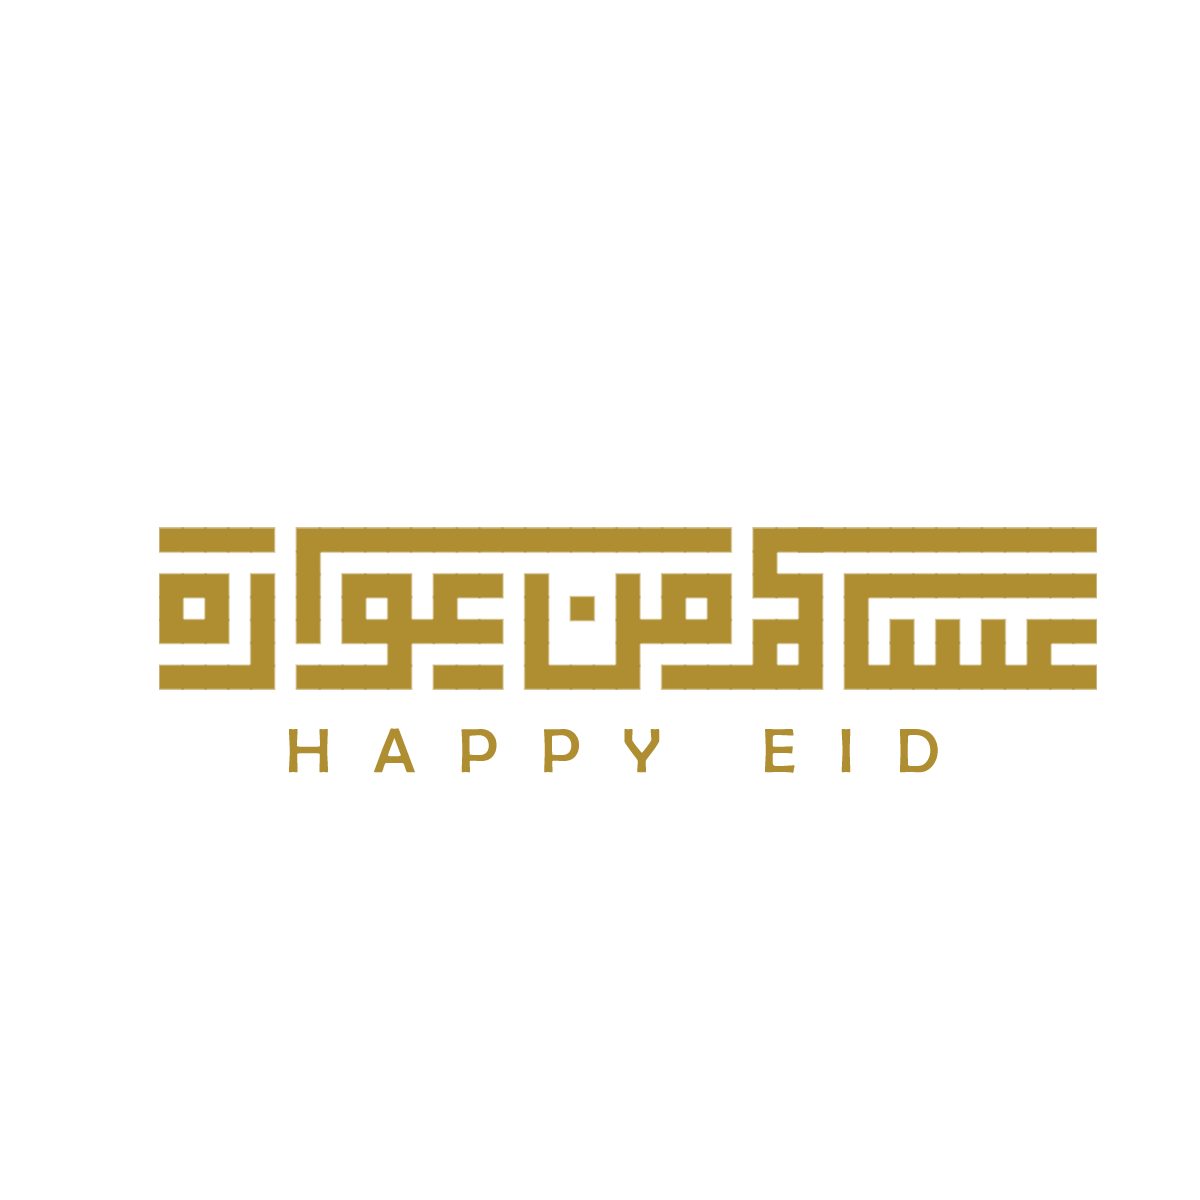 Eid Mubarak Backgrounds Eid Background and Eid PNG text Here